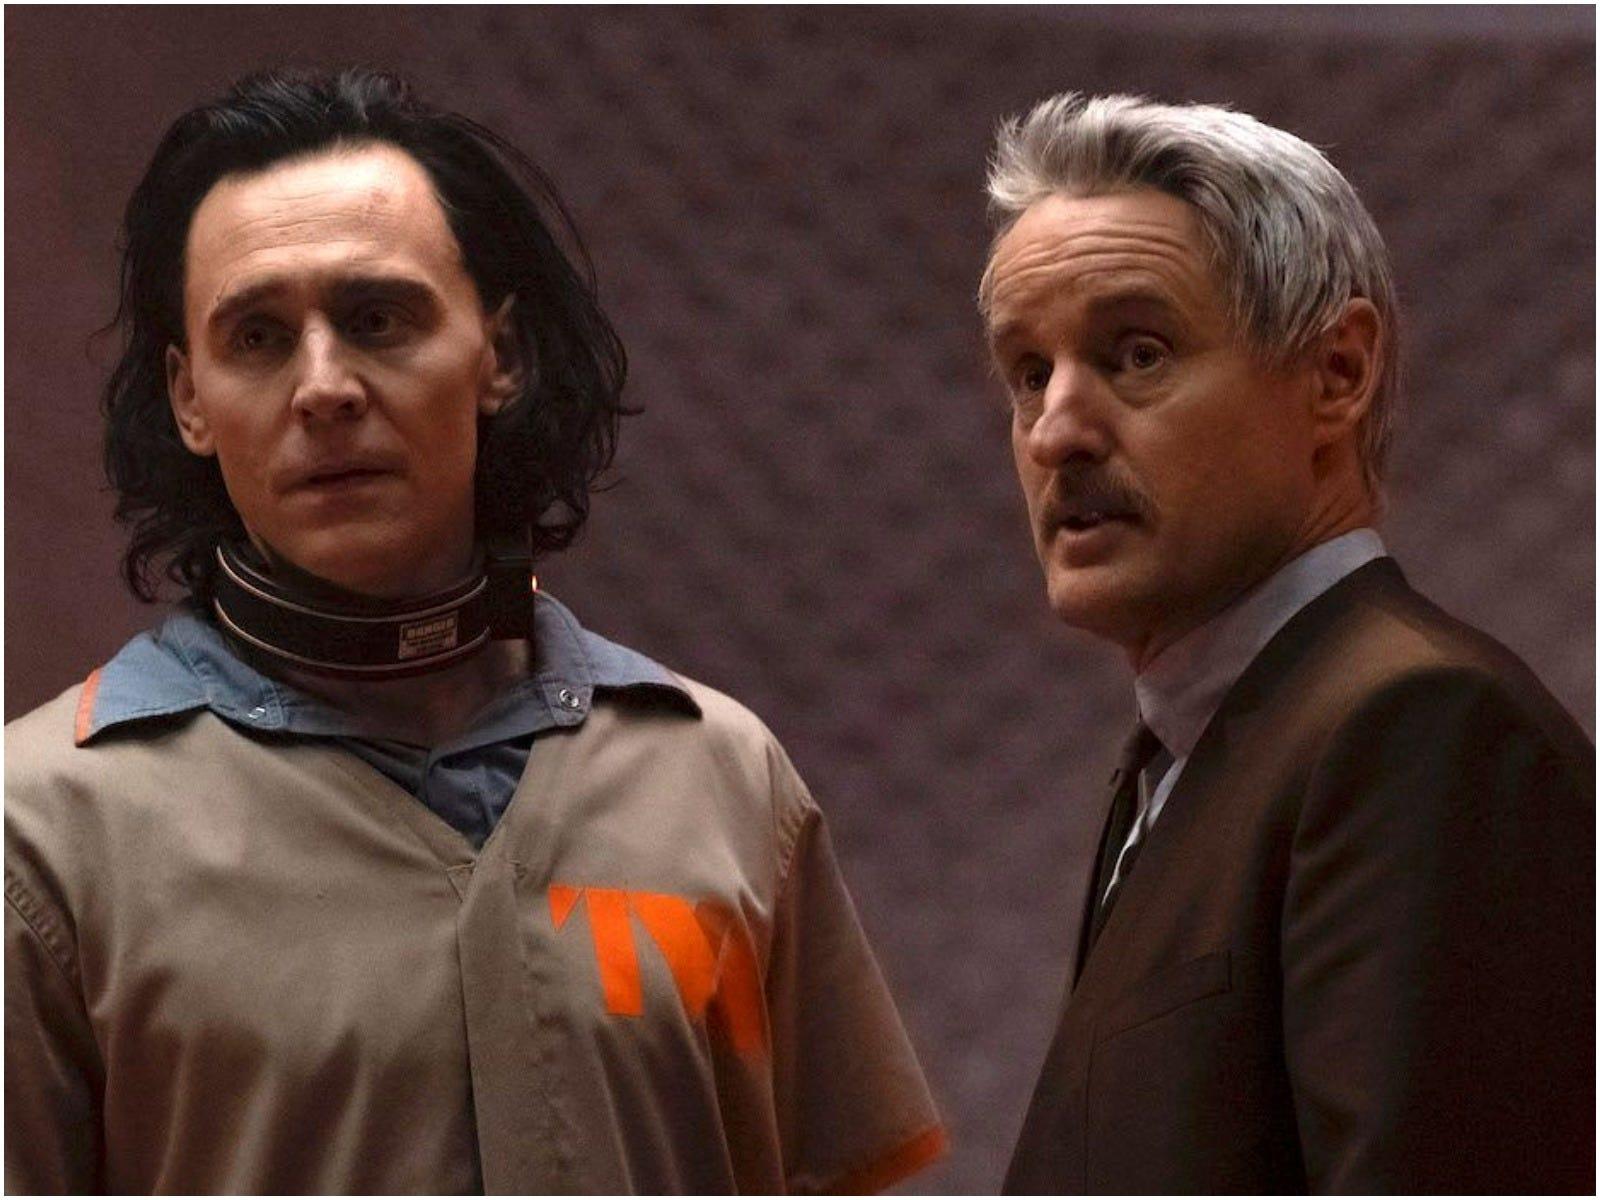 'Loki' introduces Owen Wilson as Agent Mobius and the Time Variance Authority - here's who they ...